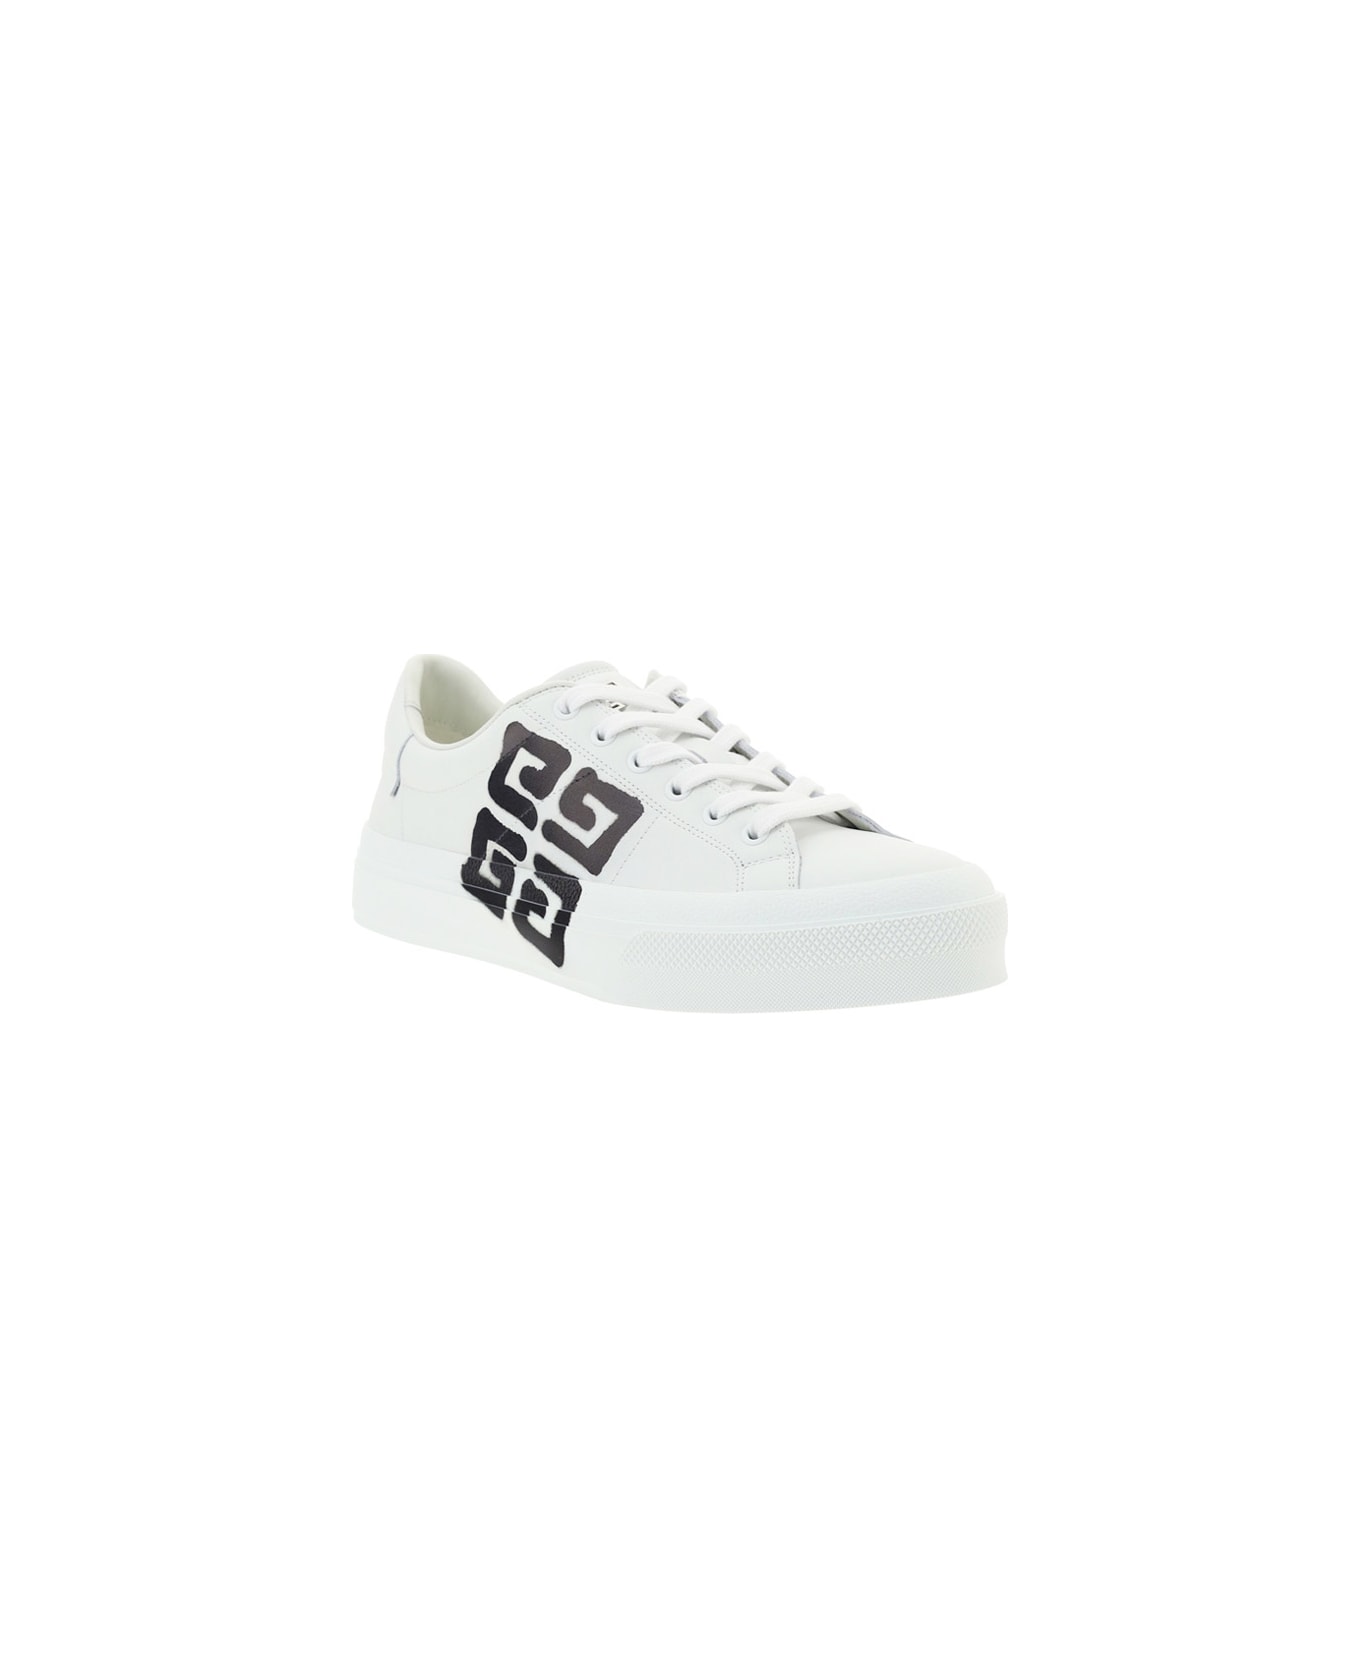 Givenchy Sneakers - White/black スニーカー